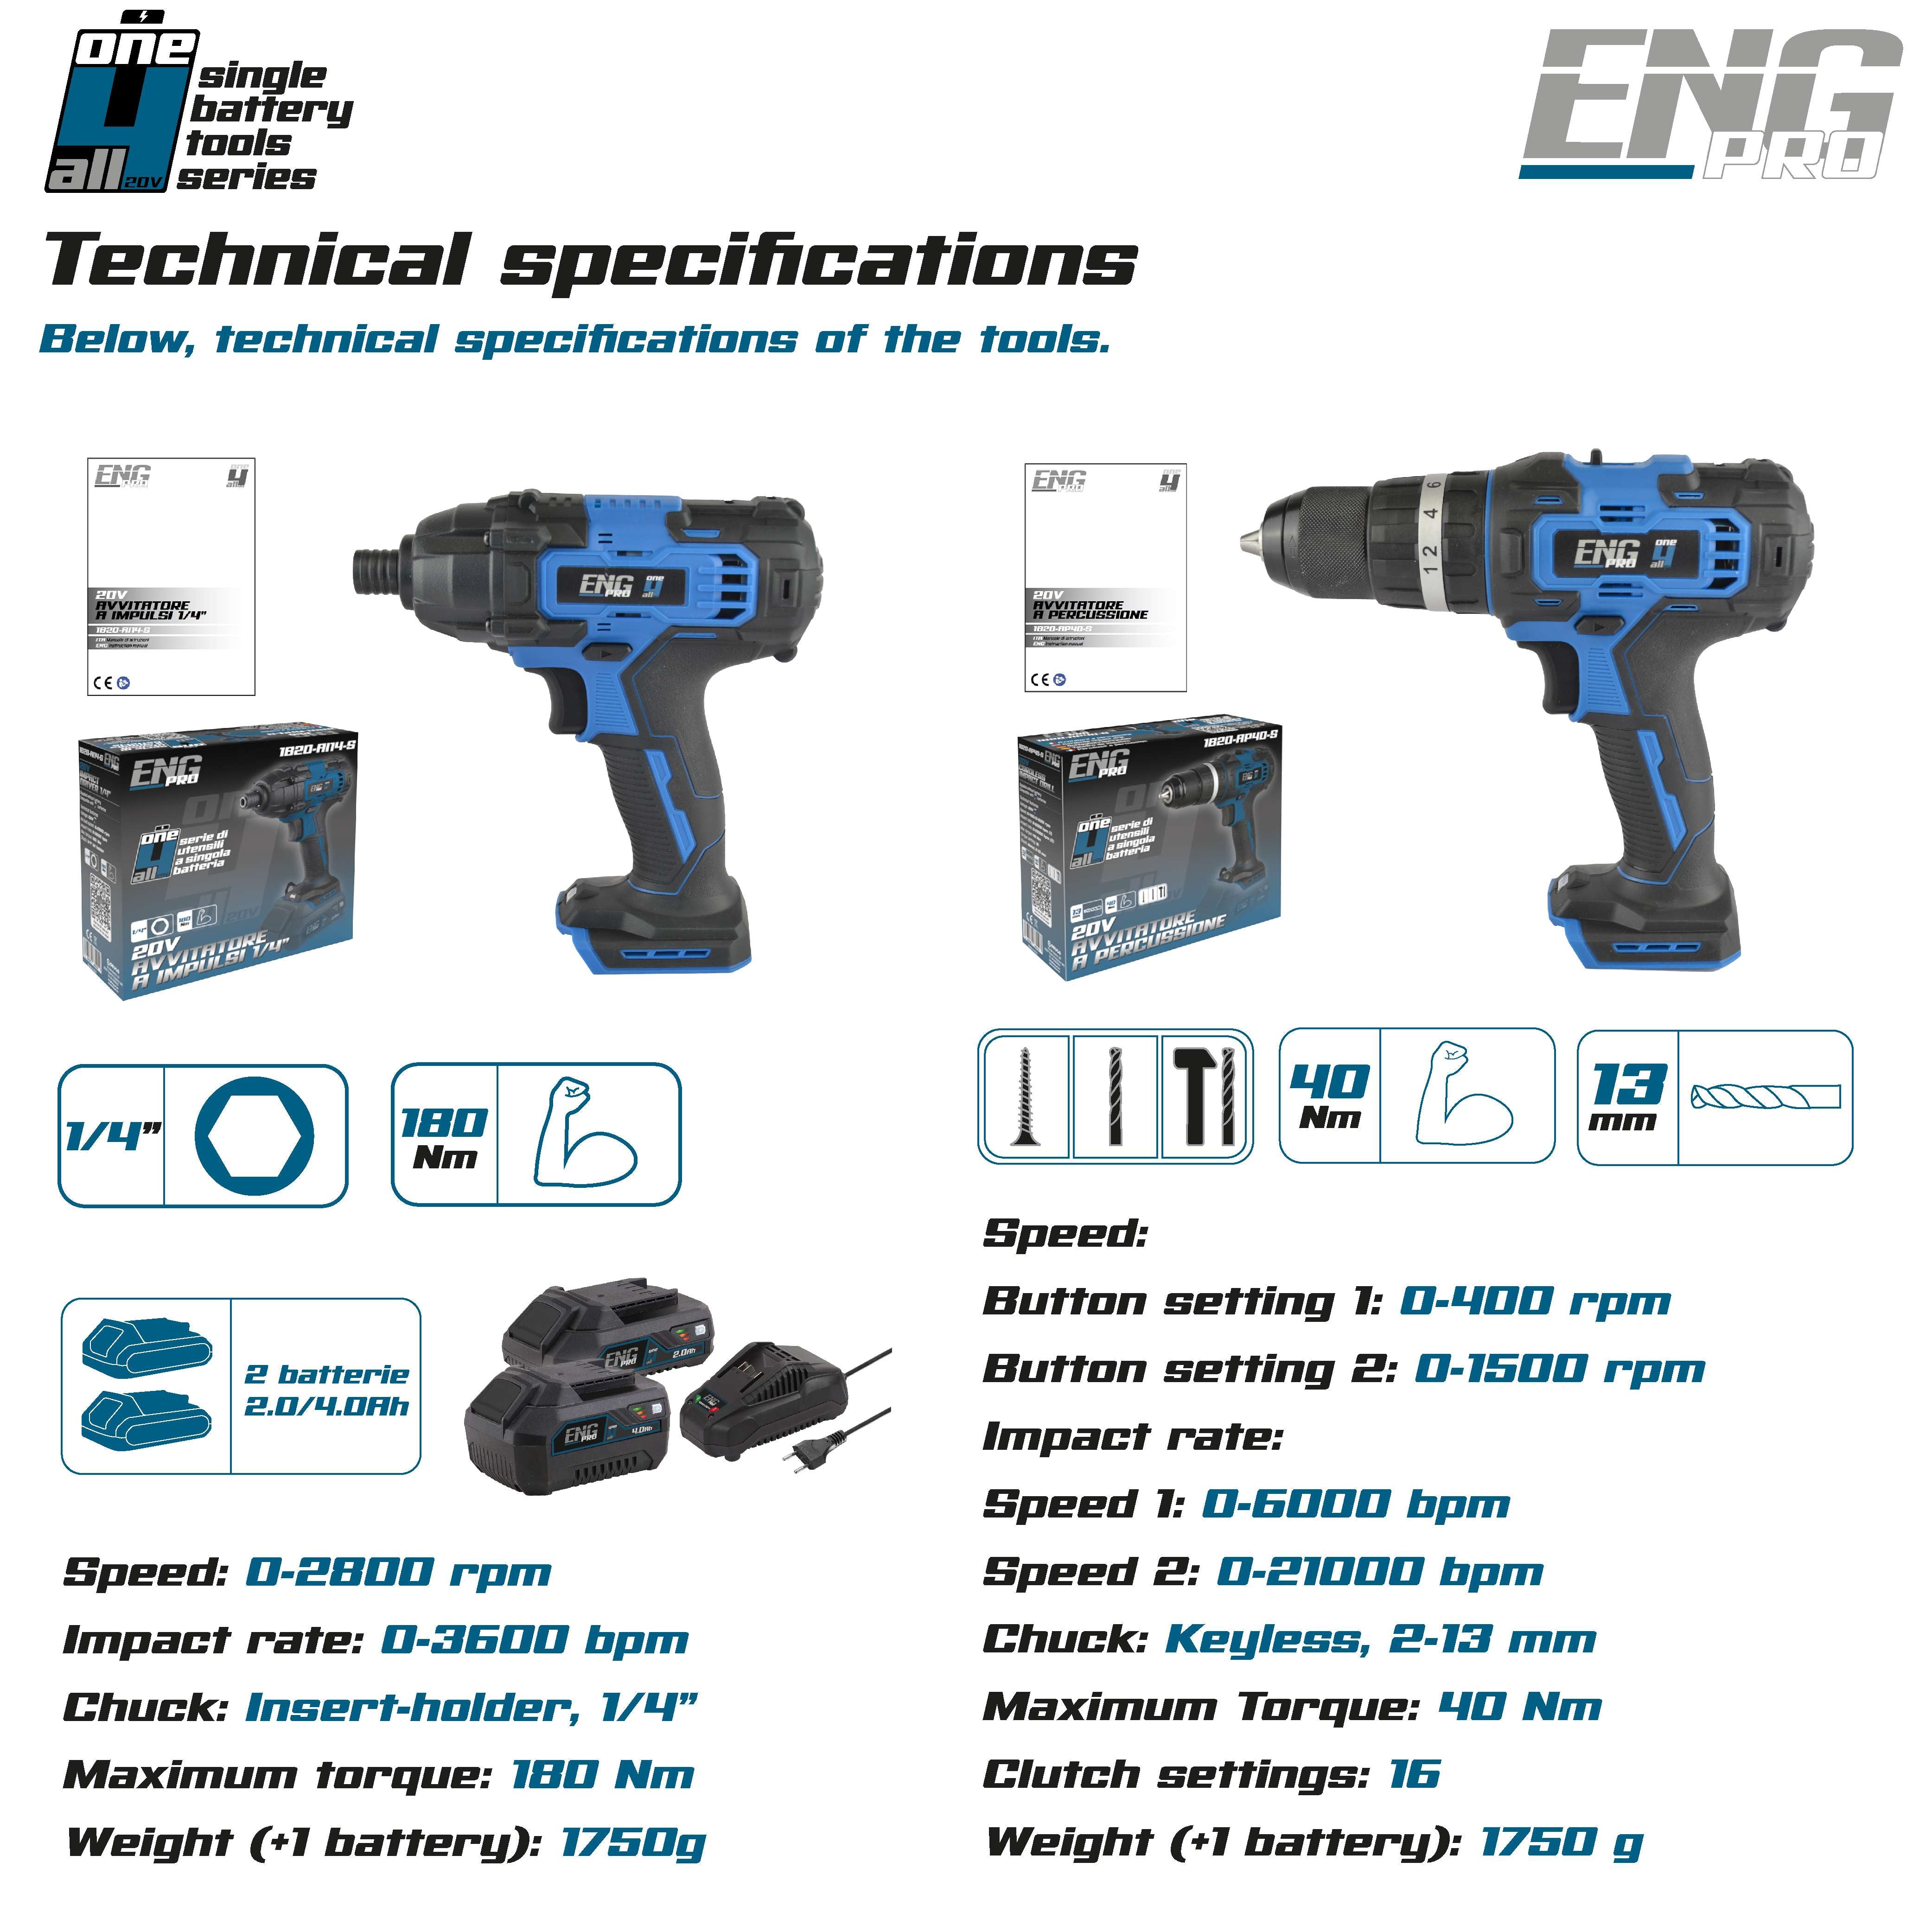 Hammer drill driver, Impact Wrench and 2 x 2/4.0Ah Batteries ENG PRO